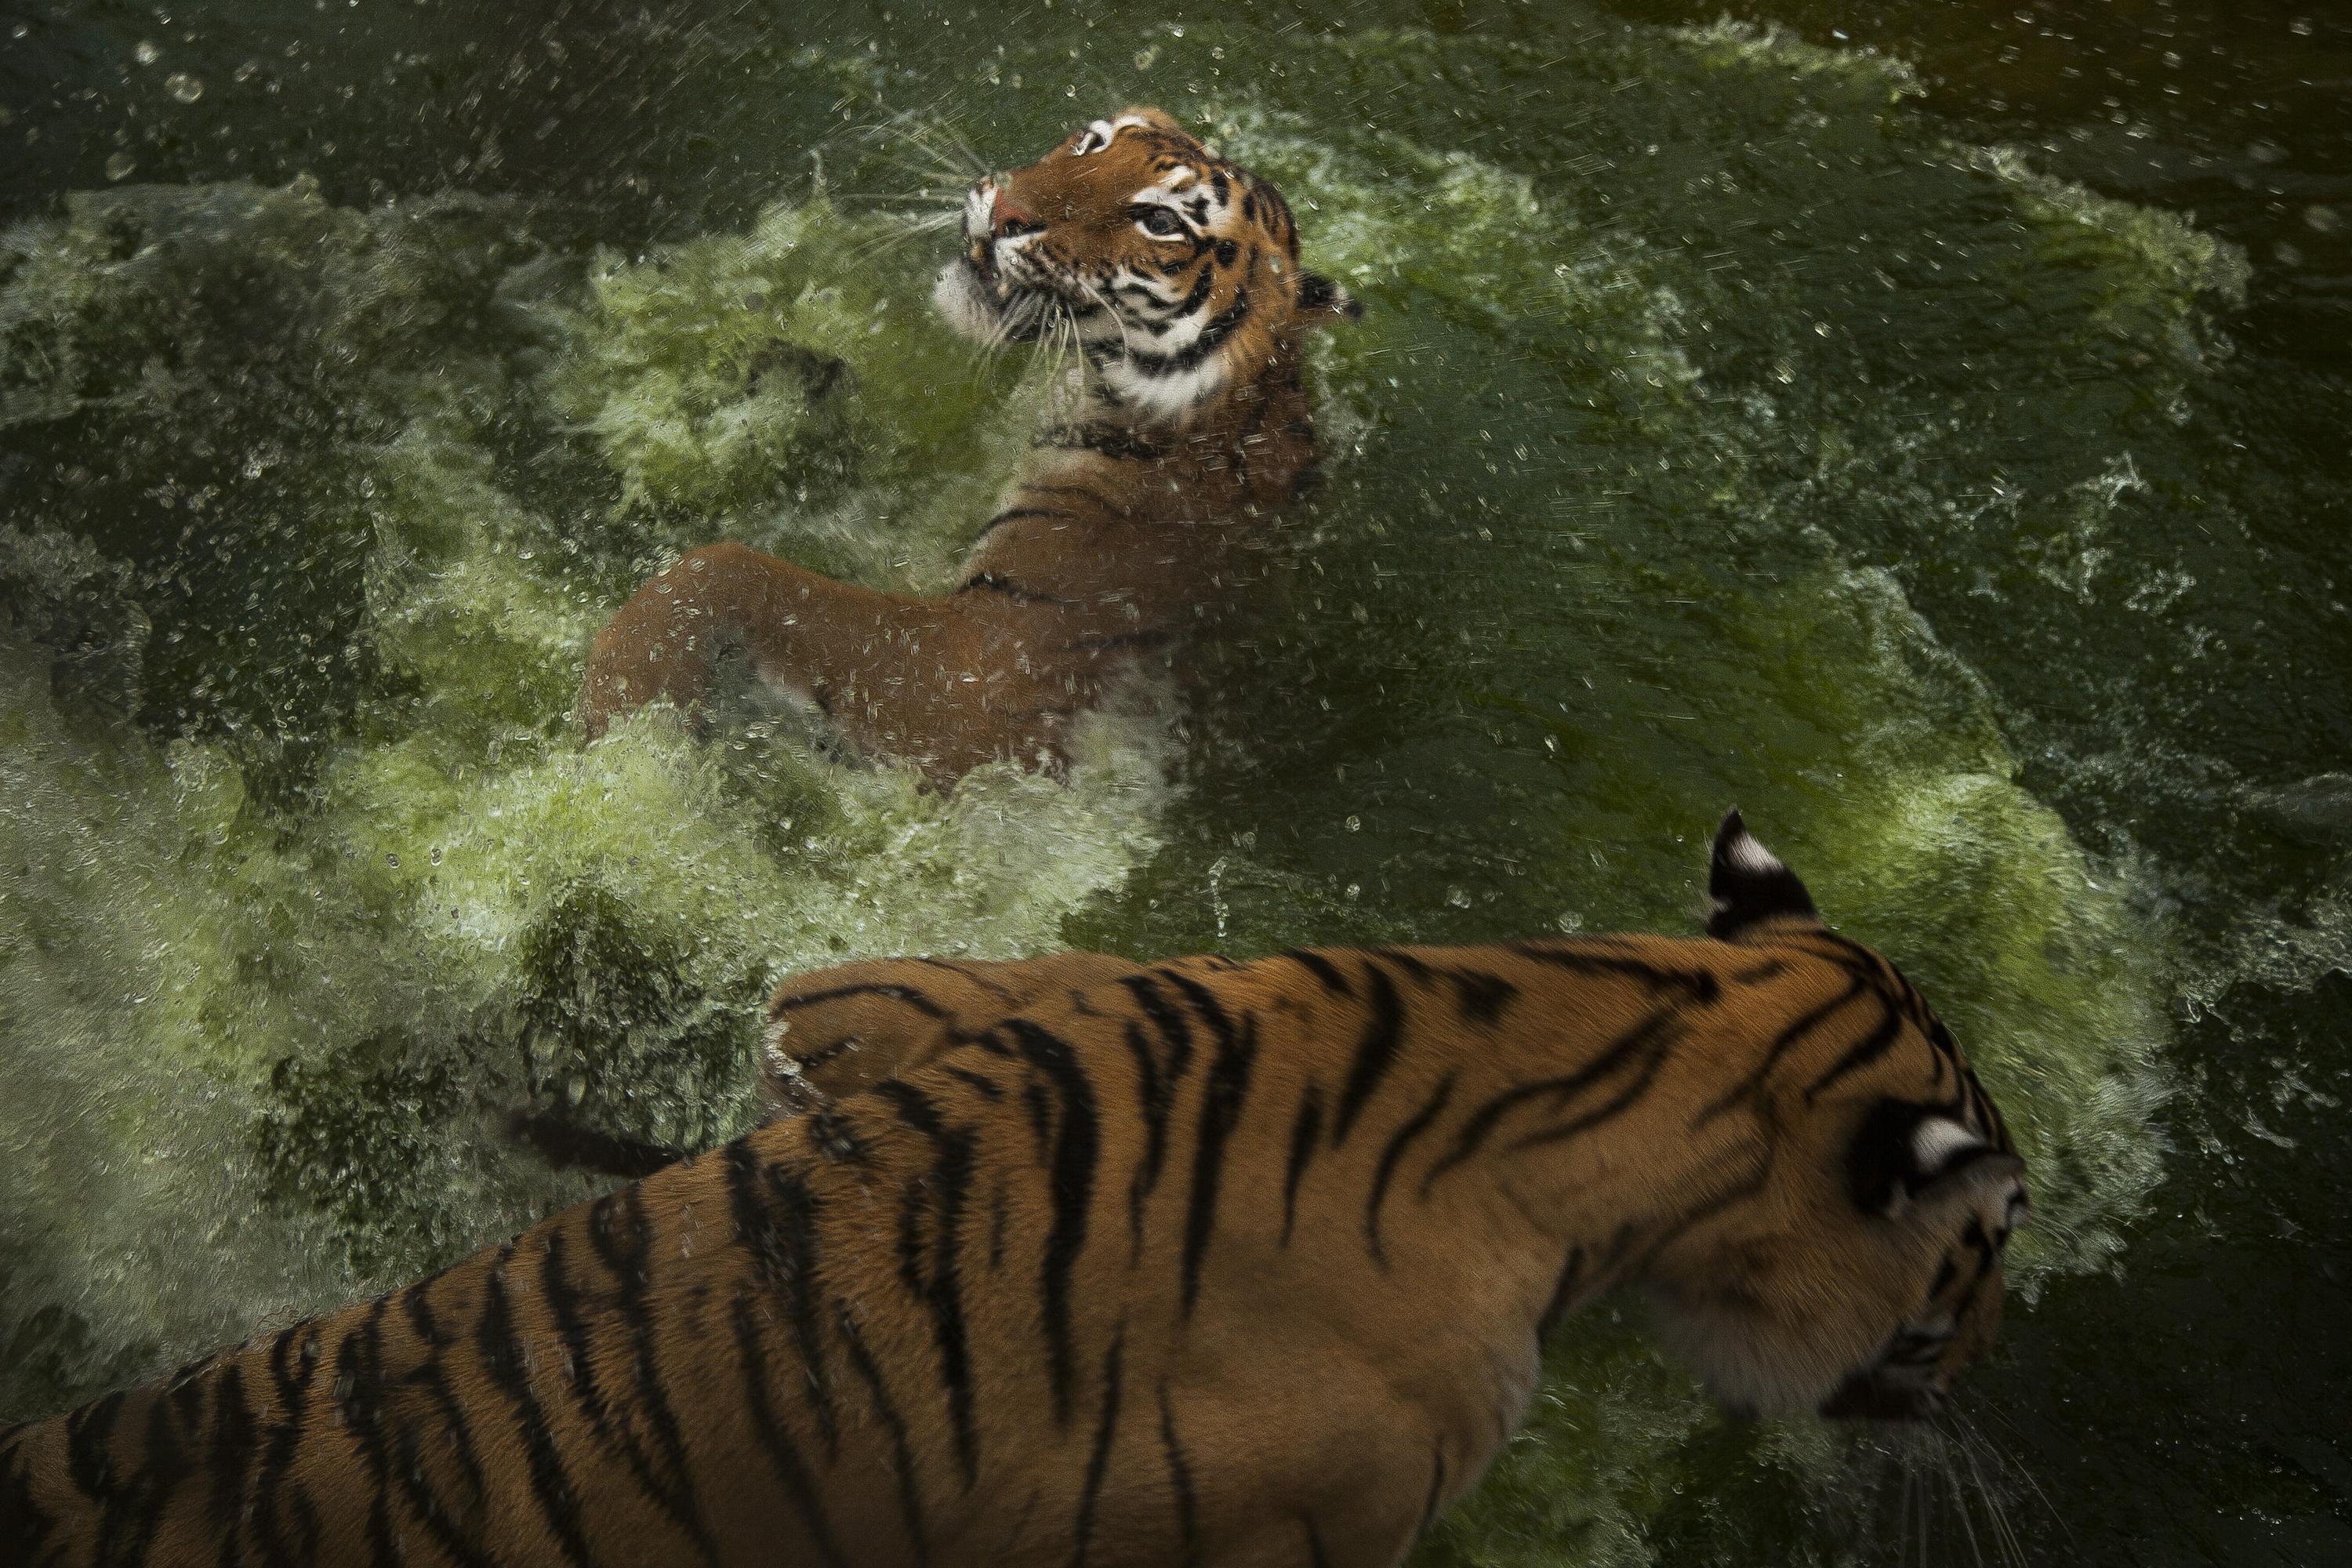 The 21 Bengal tigers in Joya Grande are, without a doubt, the main draw for tourists. Each consumes between 15 and 20 pounds of chicken per day — a hight cost that used to be paid with illicit cash. Photo: Víctor Peña/El Faro